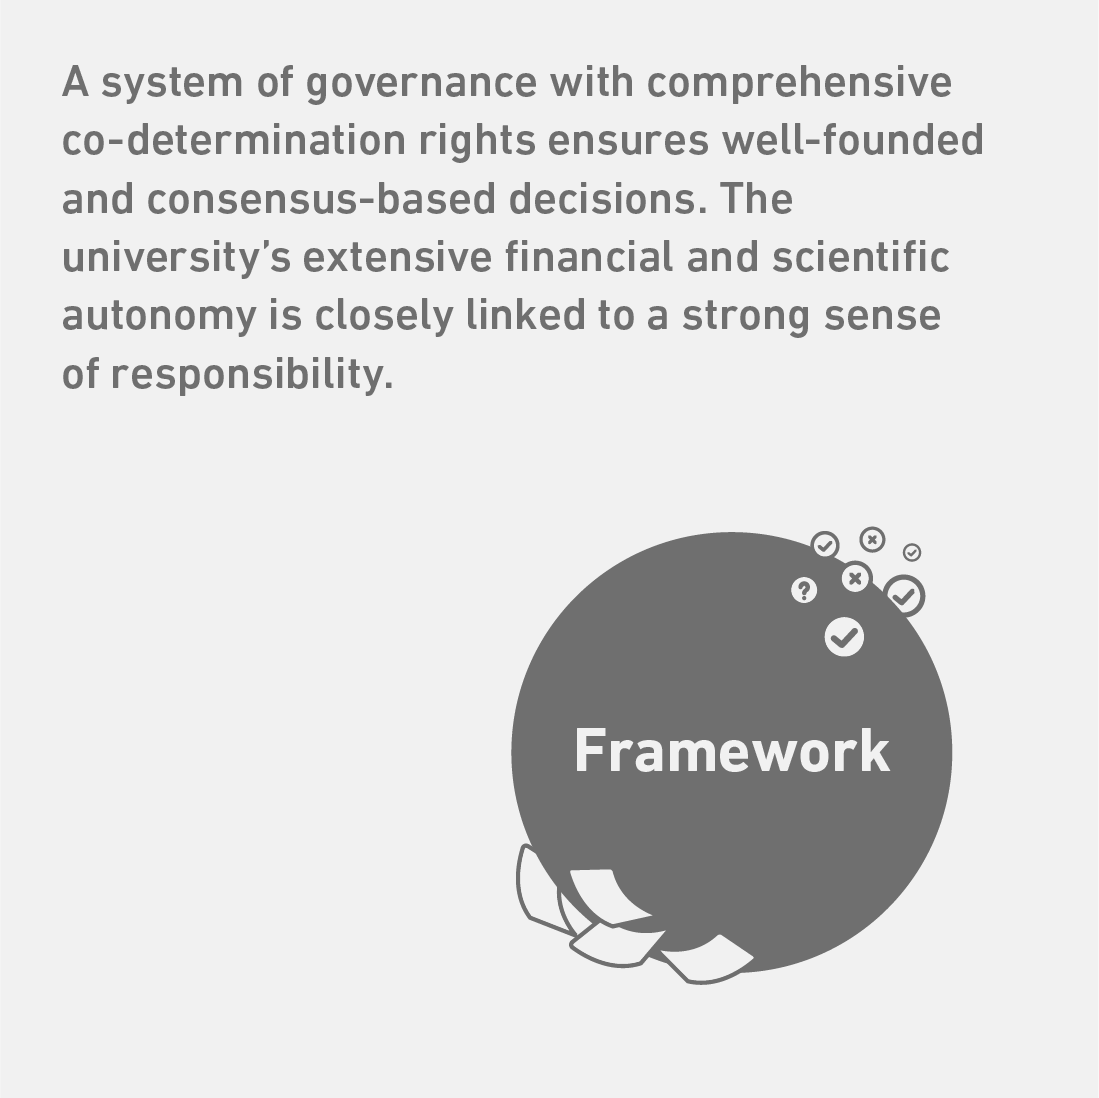 A system of governance with comprehensive co-determination rights ensures well-founded and consensus-based decisions. The university’s extensive financial and scientific autonomy is closely linked to a strong sense of responsibility. The Link goes to the Value Creation Model.